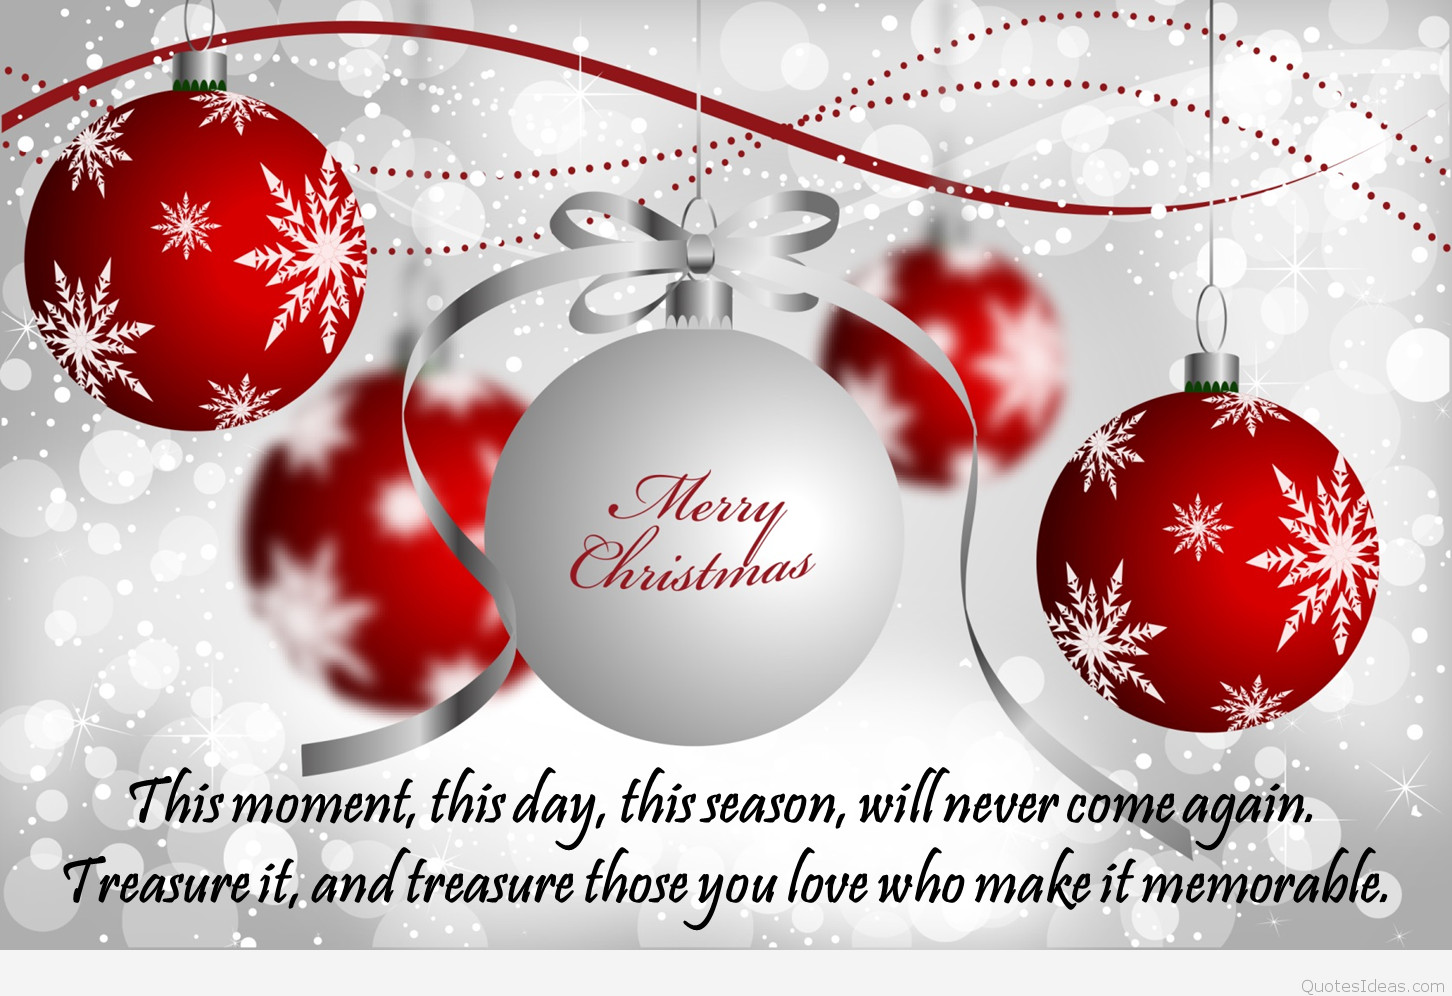 Merry Christmas Images And Quotes
 Merry Christmas quotes